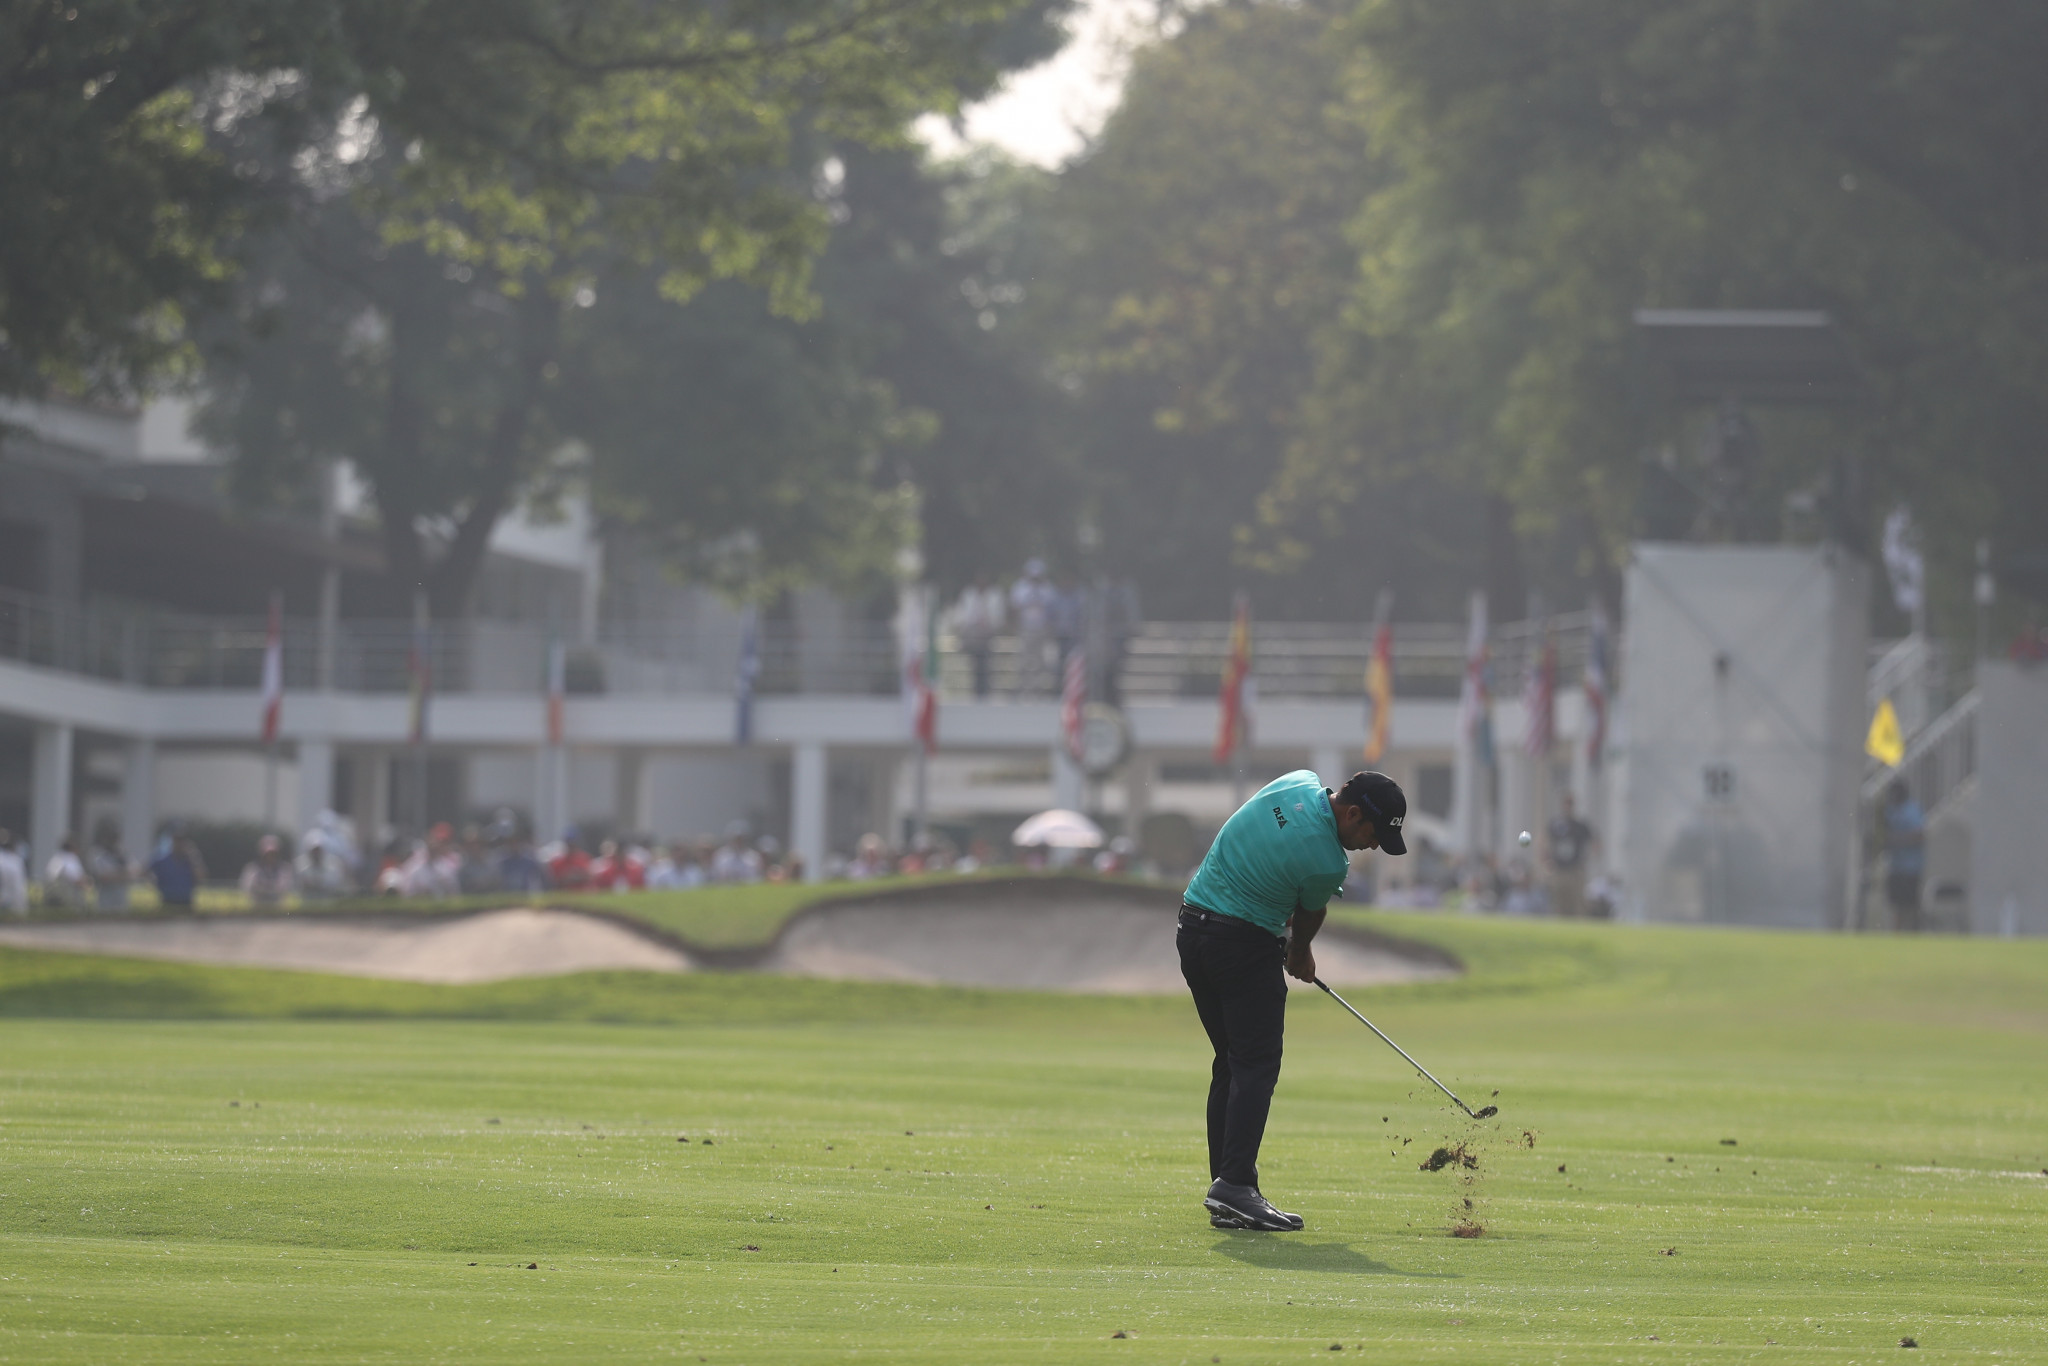 Debutant Shubhankar Sharma of India shot a five-under round of 66 to move to the top of the leaderboard at the World Golf Championships at the Club de Golf Chapultepec in Mexico City ©Getty Images